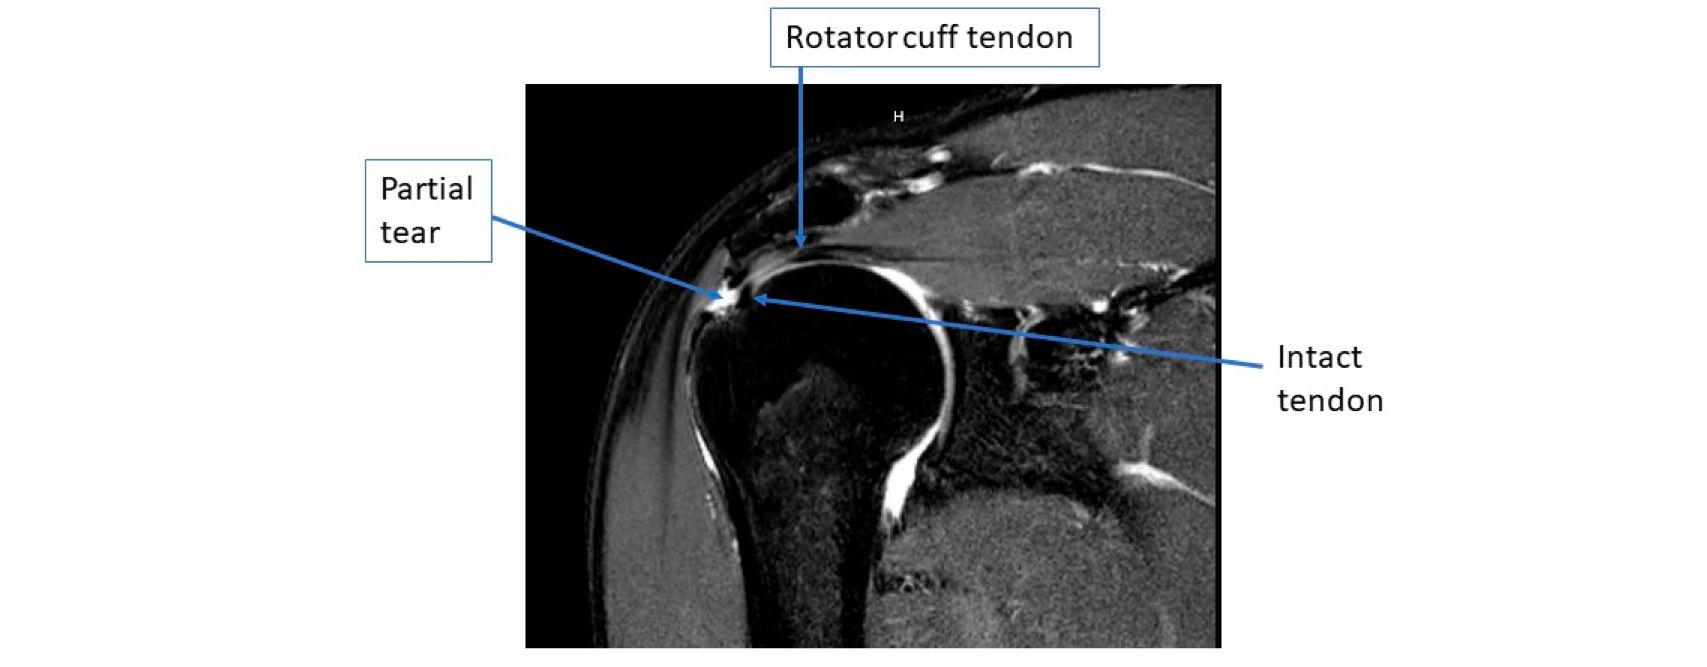 mri-image-of-a-partial-thickness-rotator-cuff-tear.jpg